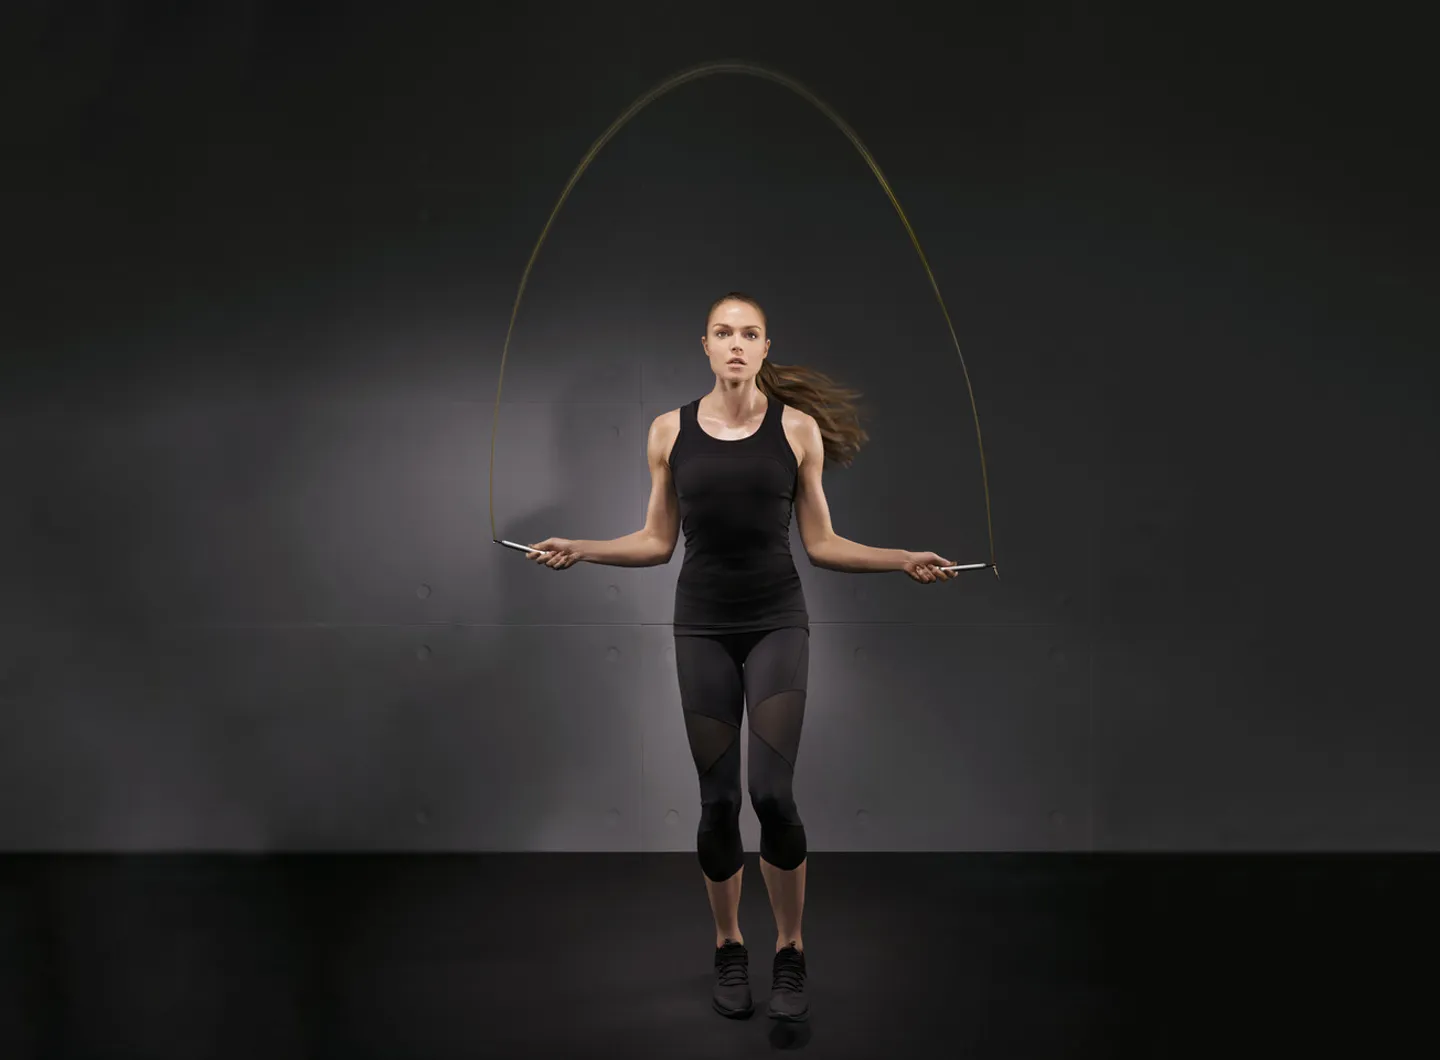 Technogym Jump Rope: Skipping rope for cardio training